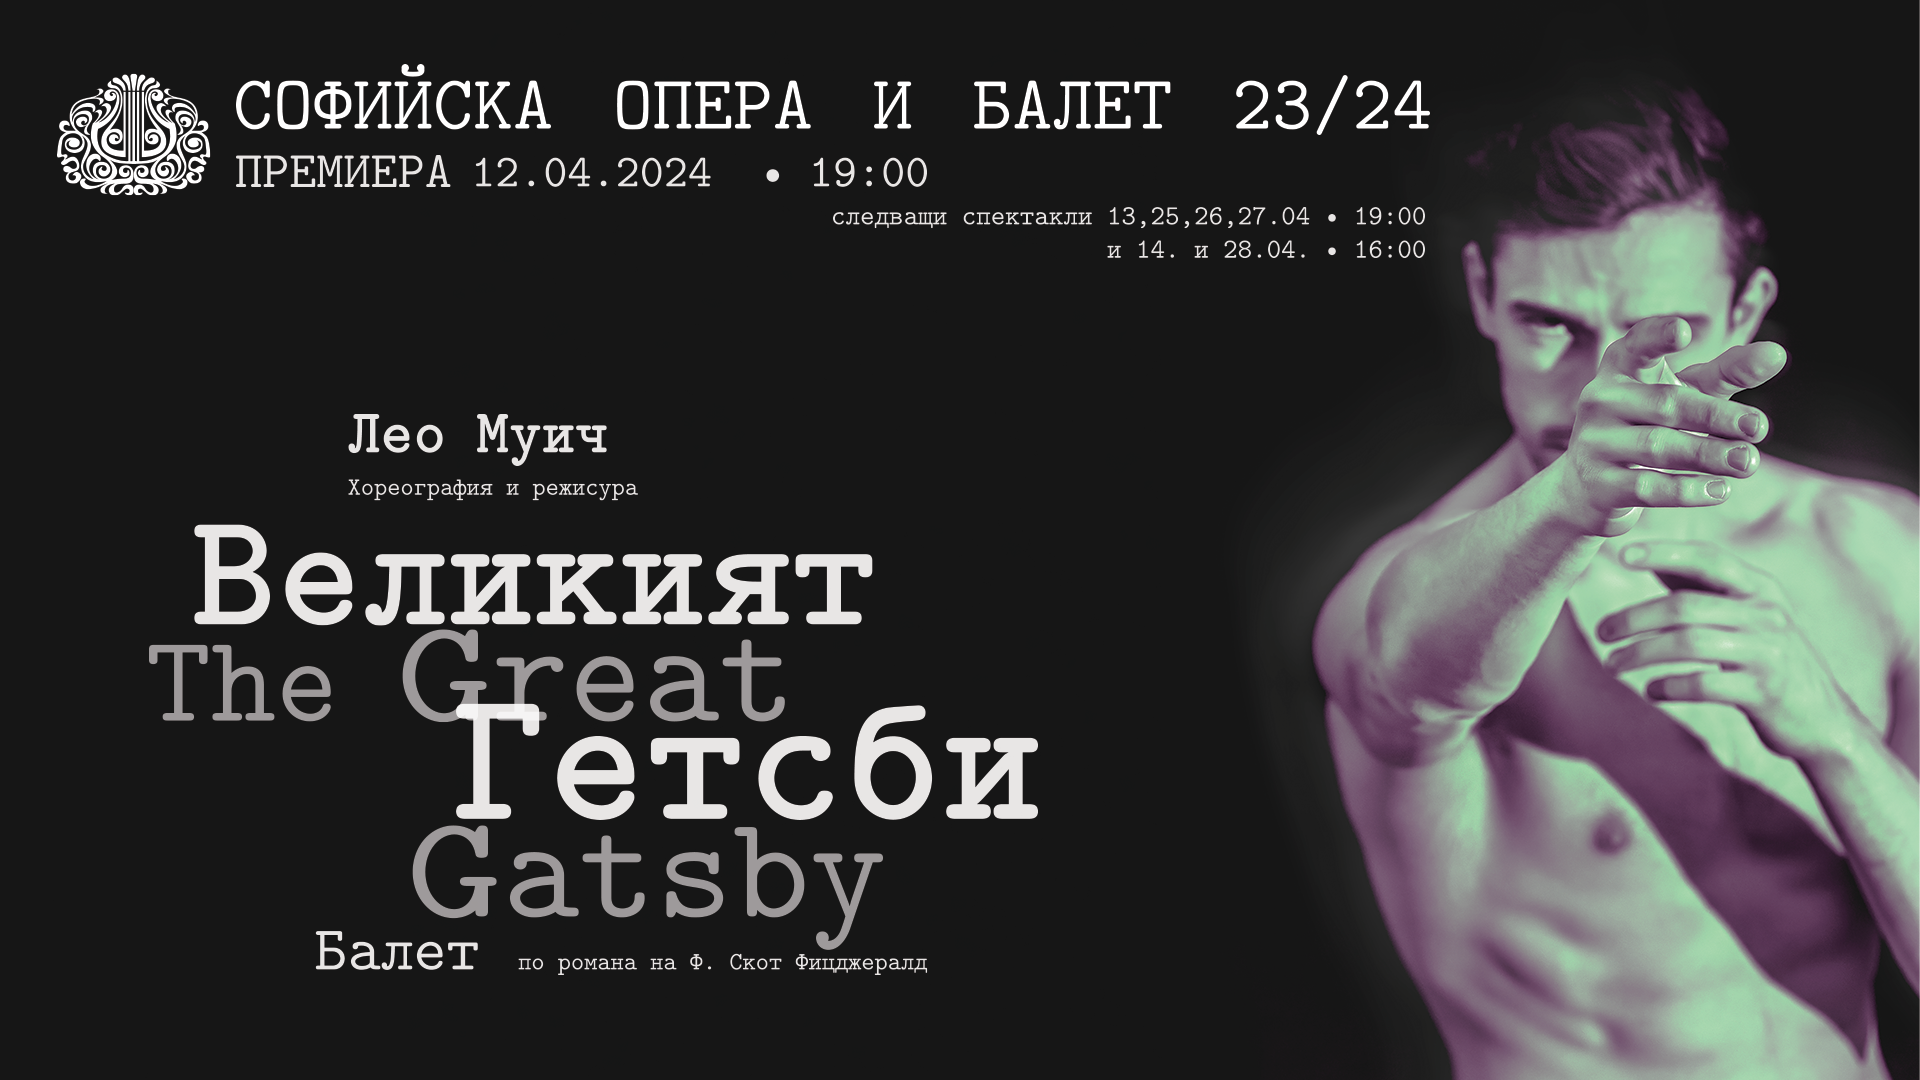 On 12 April is the premiere of the ballet "The Great Gatsby"